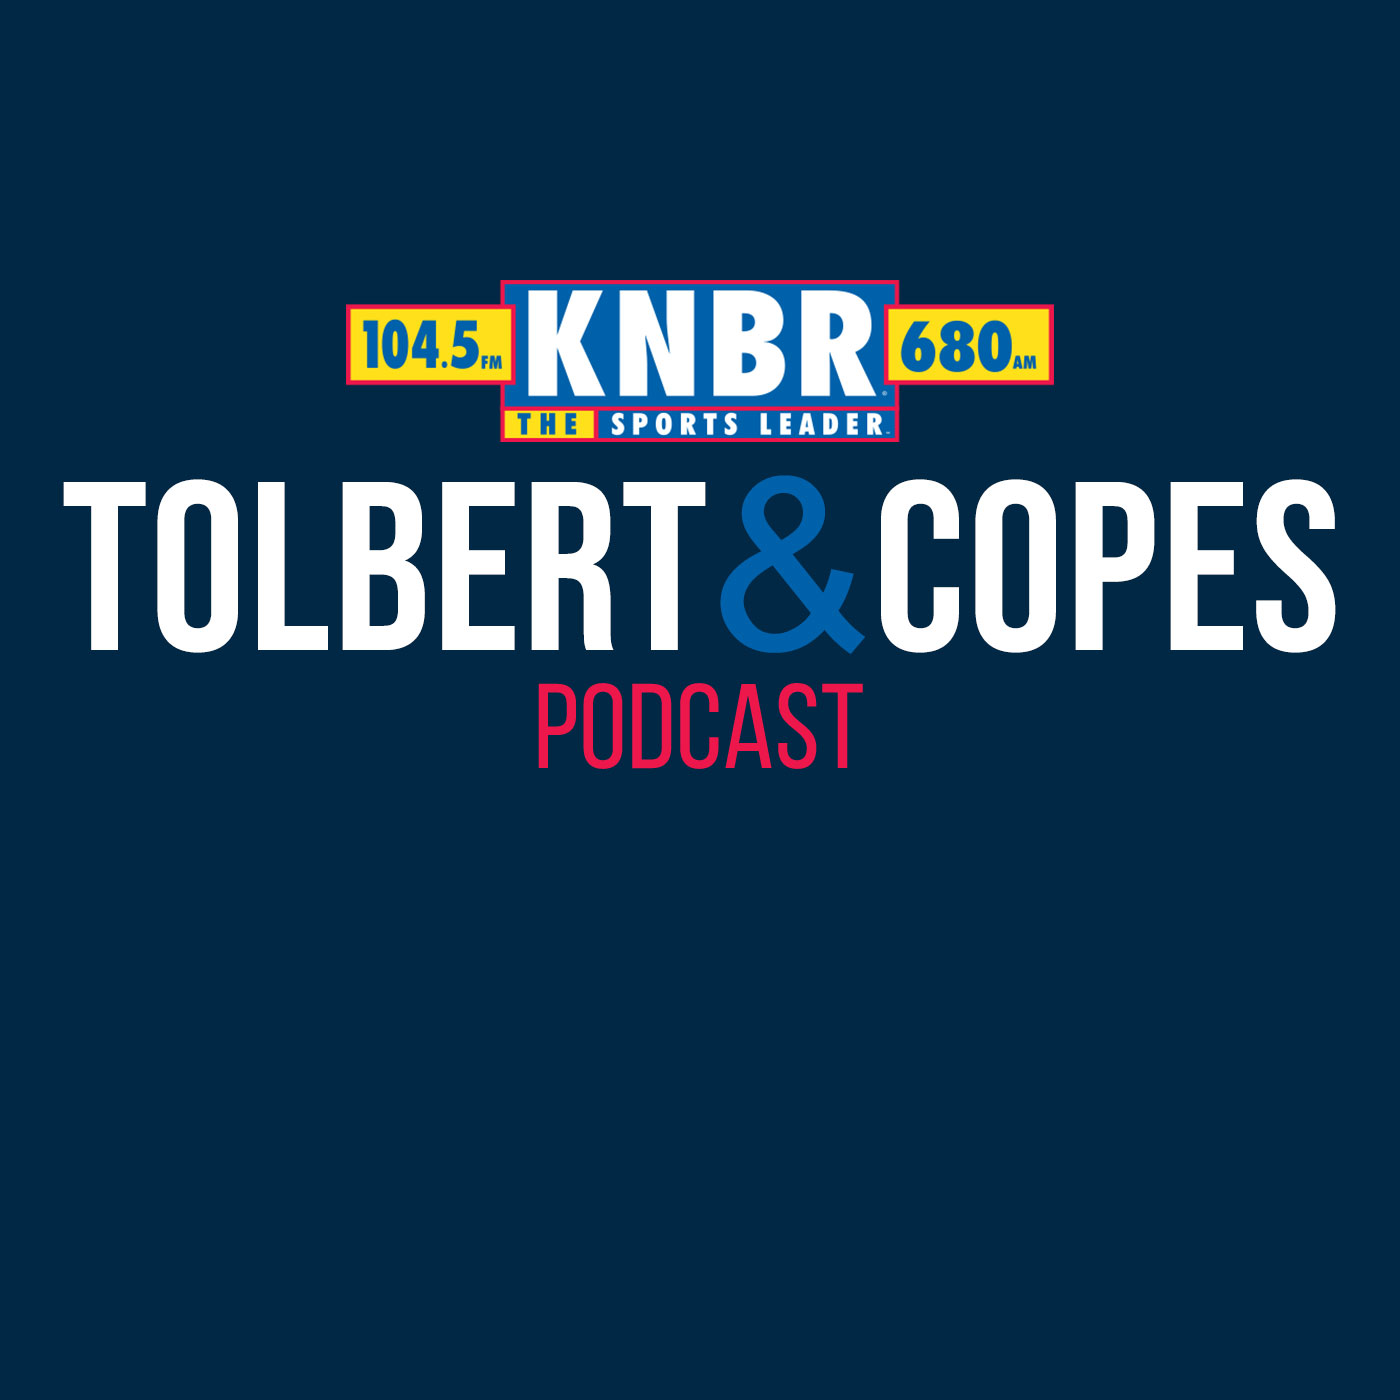 4-29 Tolbert & Copes Hour 1: Did the 49ers Address All Their Needs in the Draft?